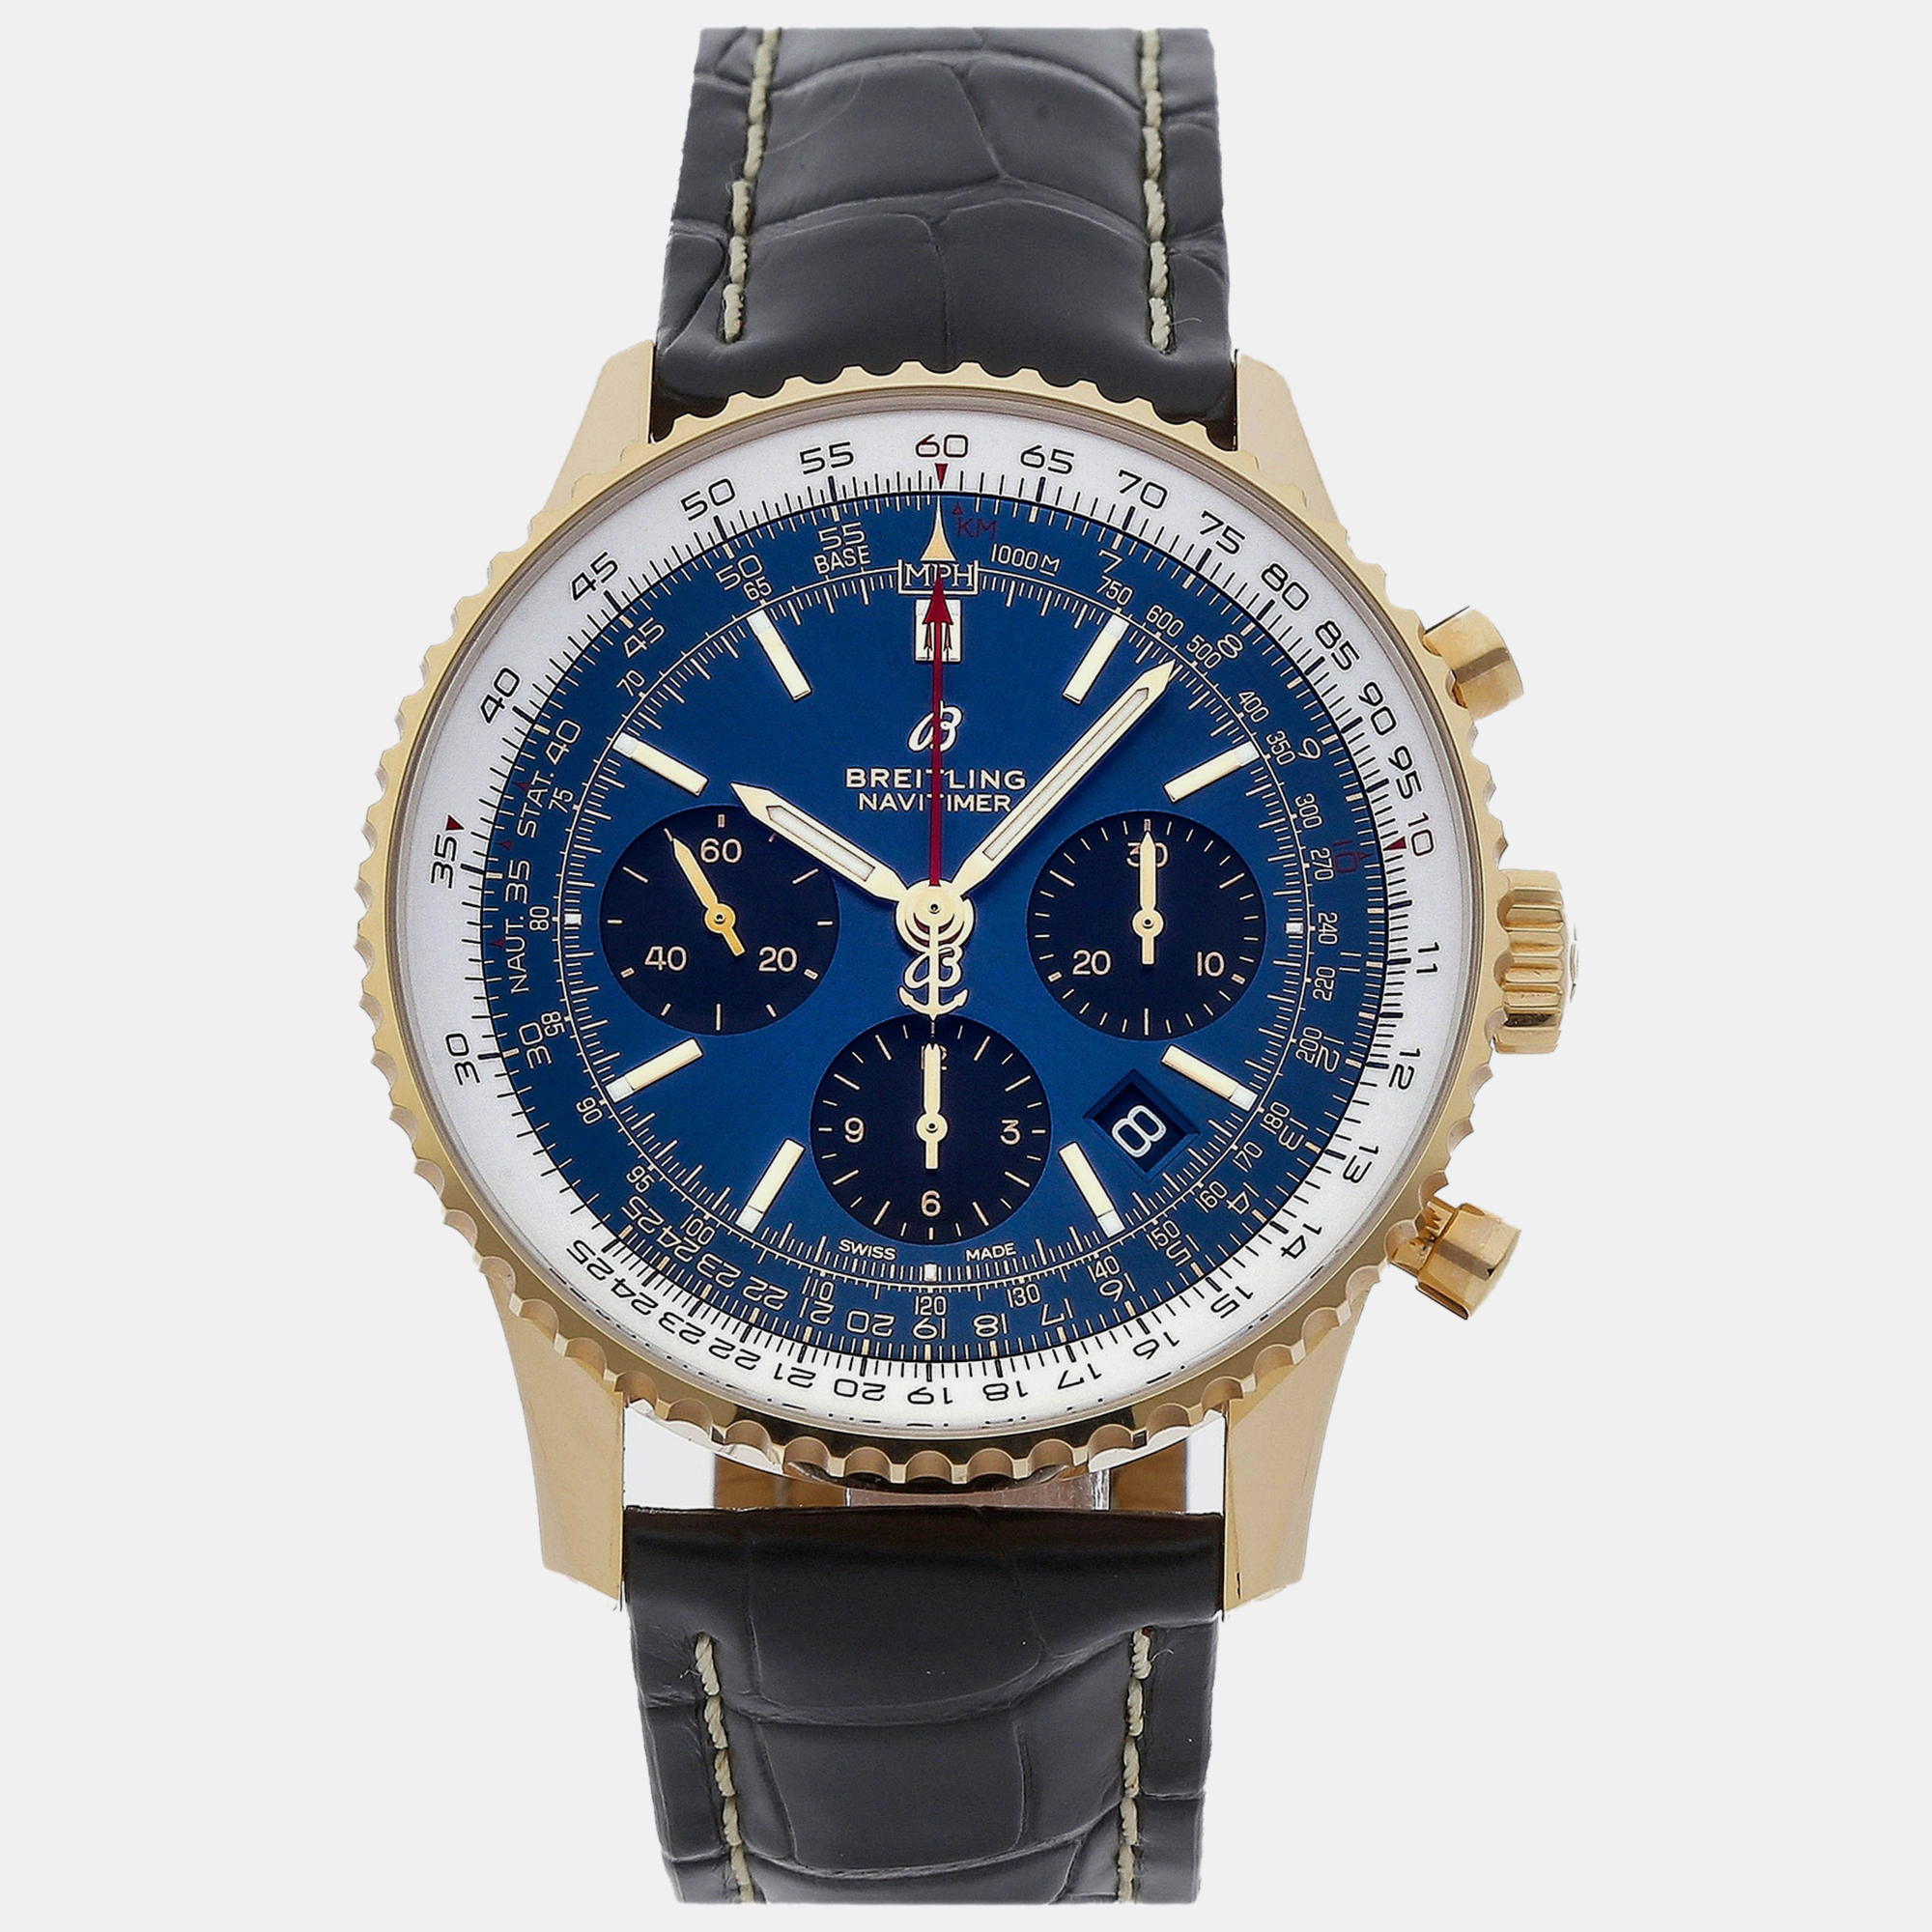 A luxury watch you will love having in your collection is this one from Breitling. Celebrated for its classy style details innovation and luxe factor Breitling delivers some of the most coveted watches in the world. Youll enjoy wearing this one.